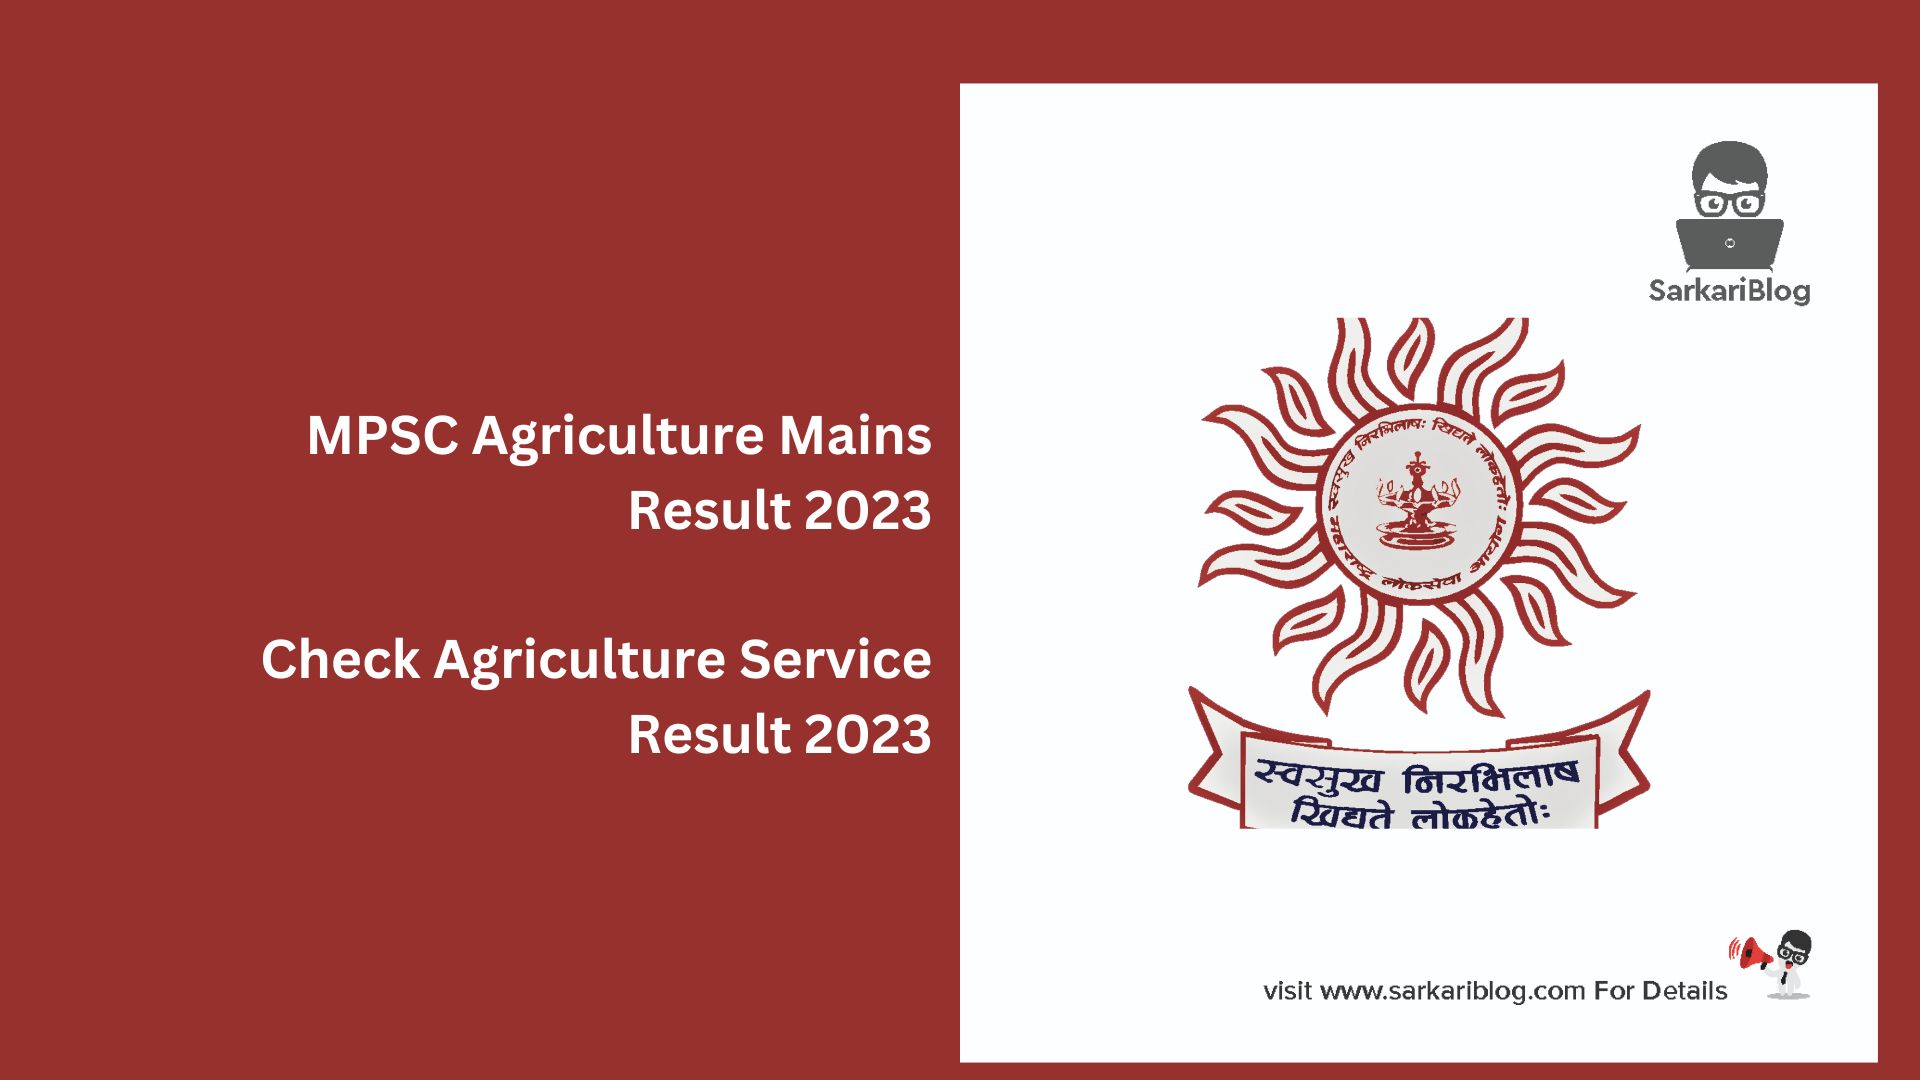 MPSC Agriculture Mains Result 2023